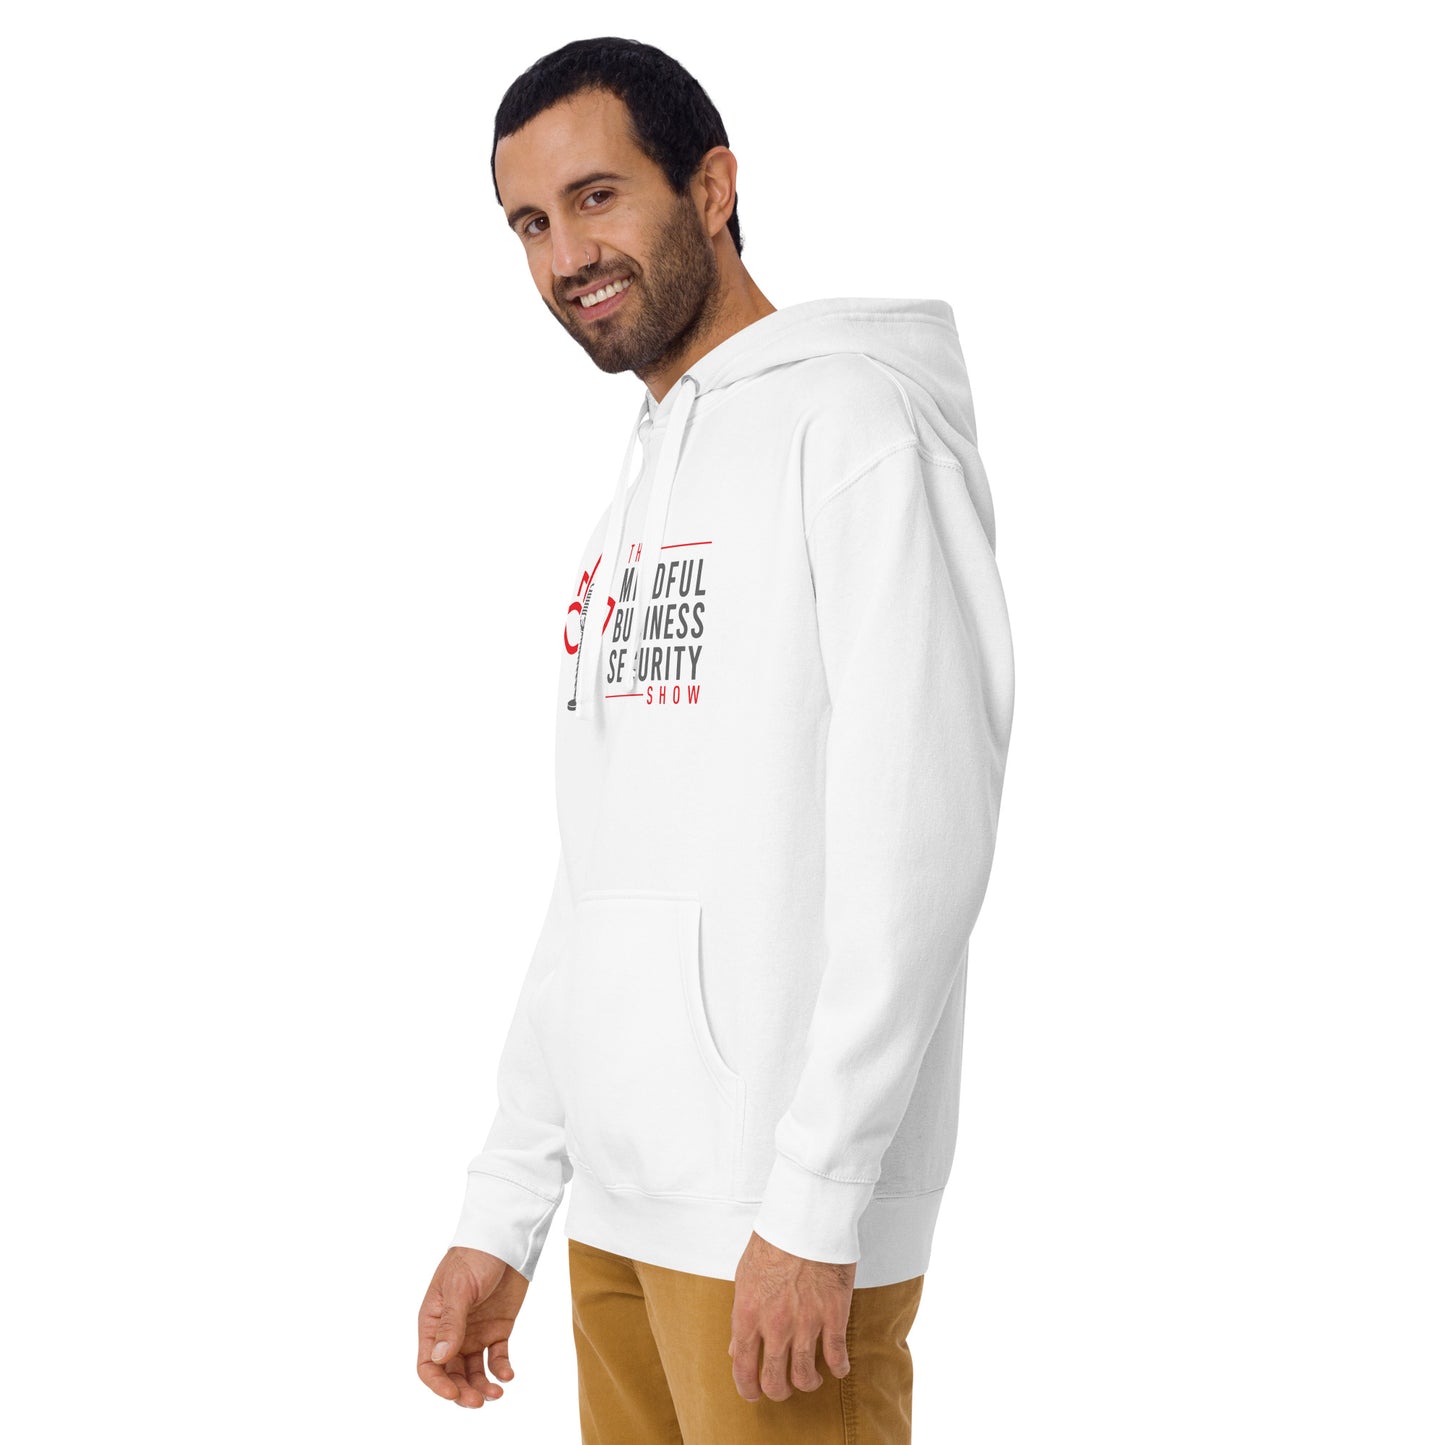 The Mindful Business Security Hoodie – The Mindful Business Security Shop